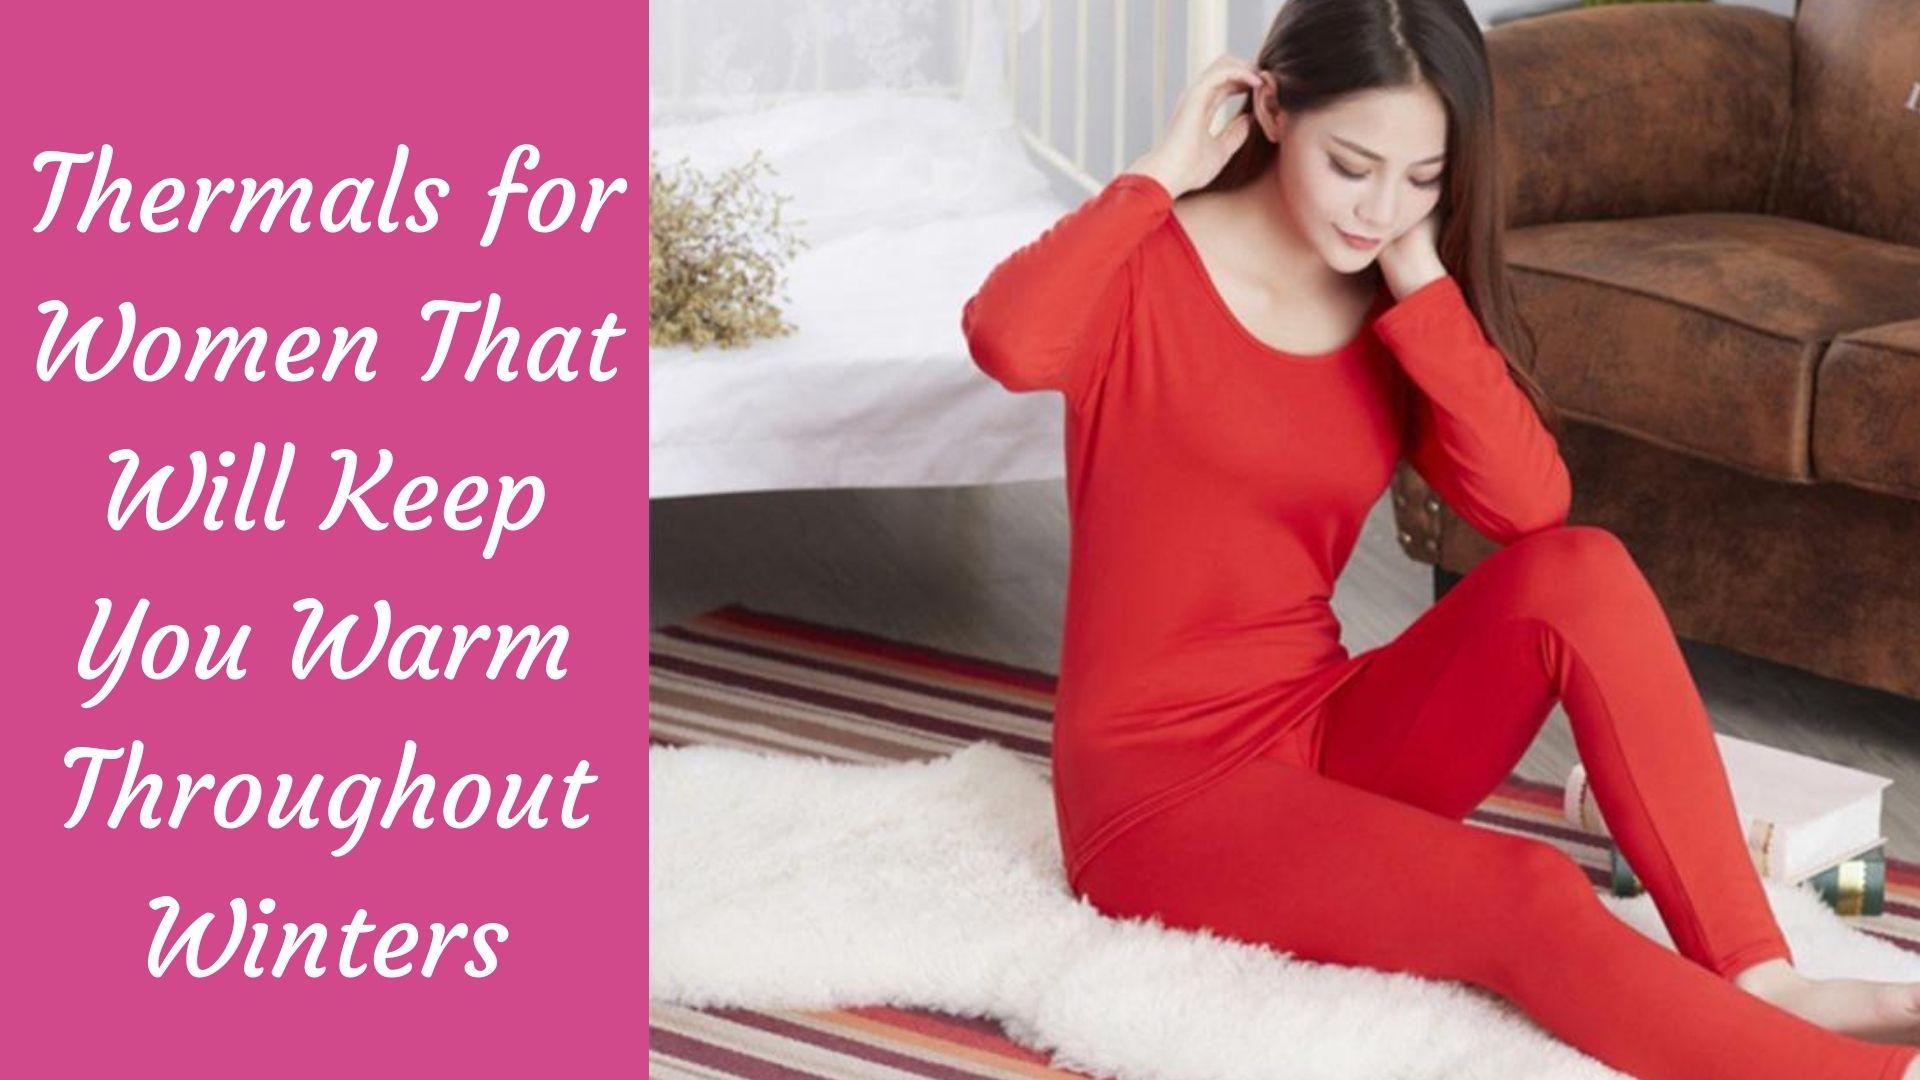 Best women's thermal sets to keep you warm through winter - Mirror